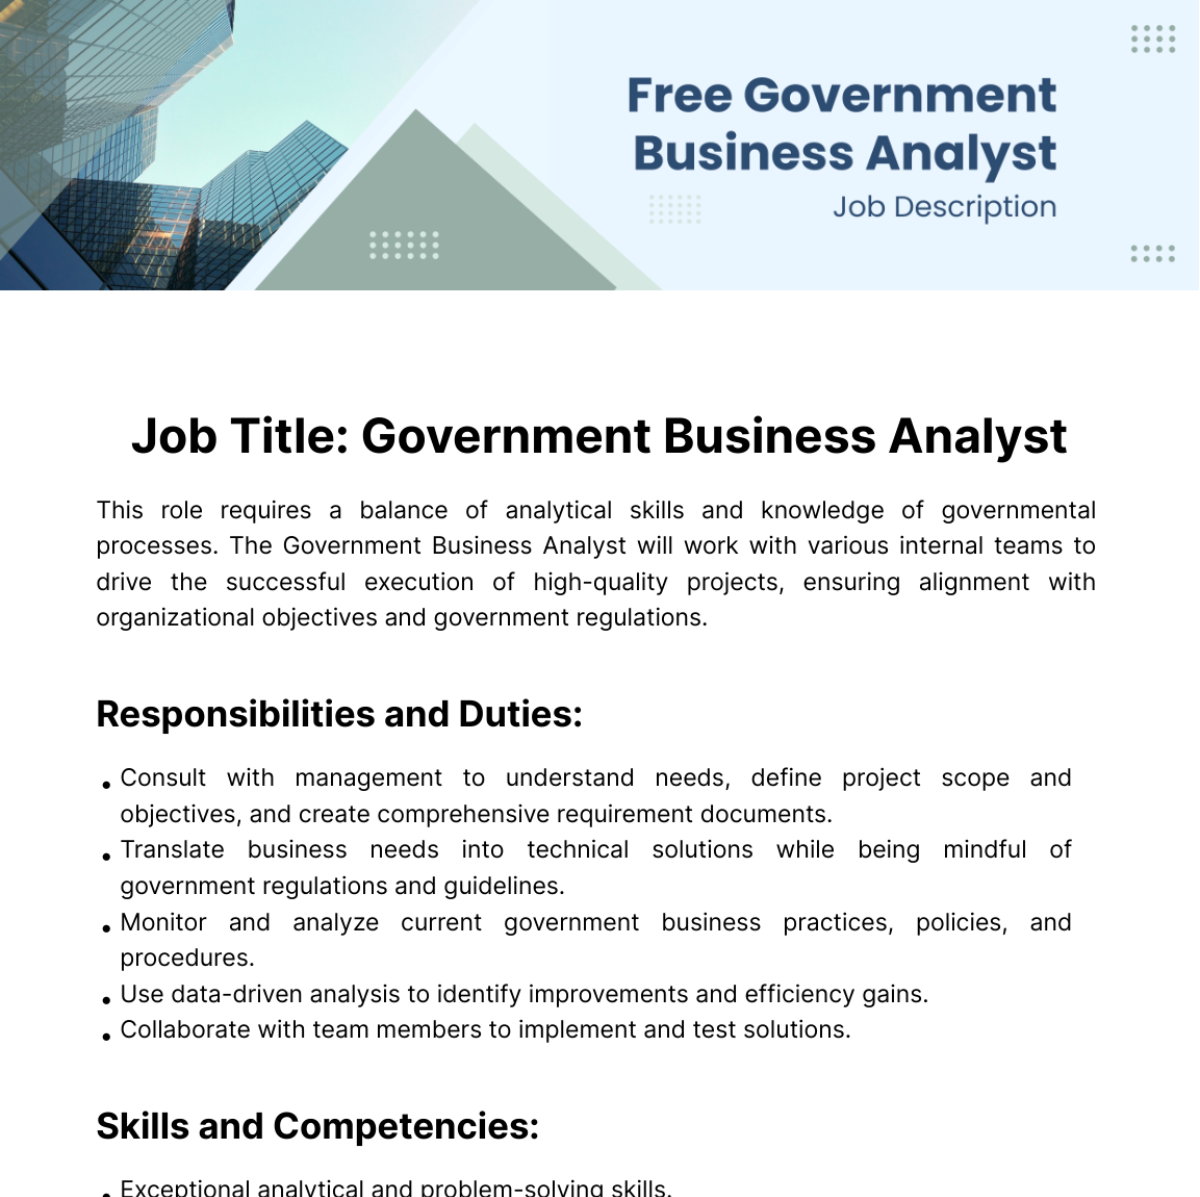 Free Government Business Analyst Job Description Template